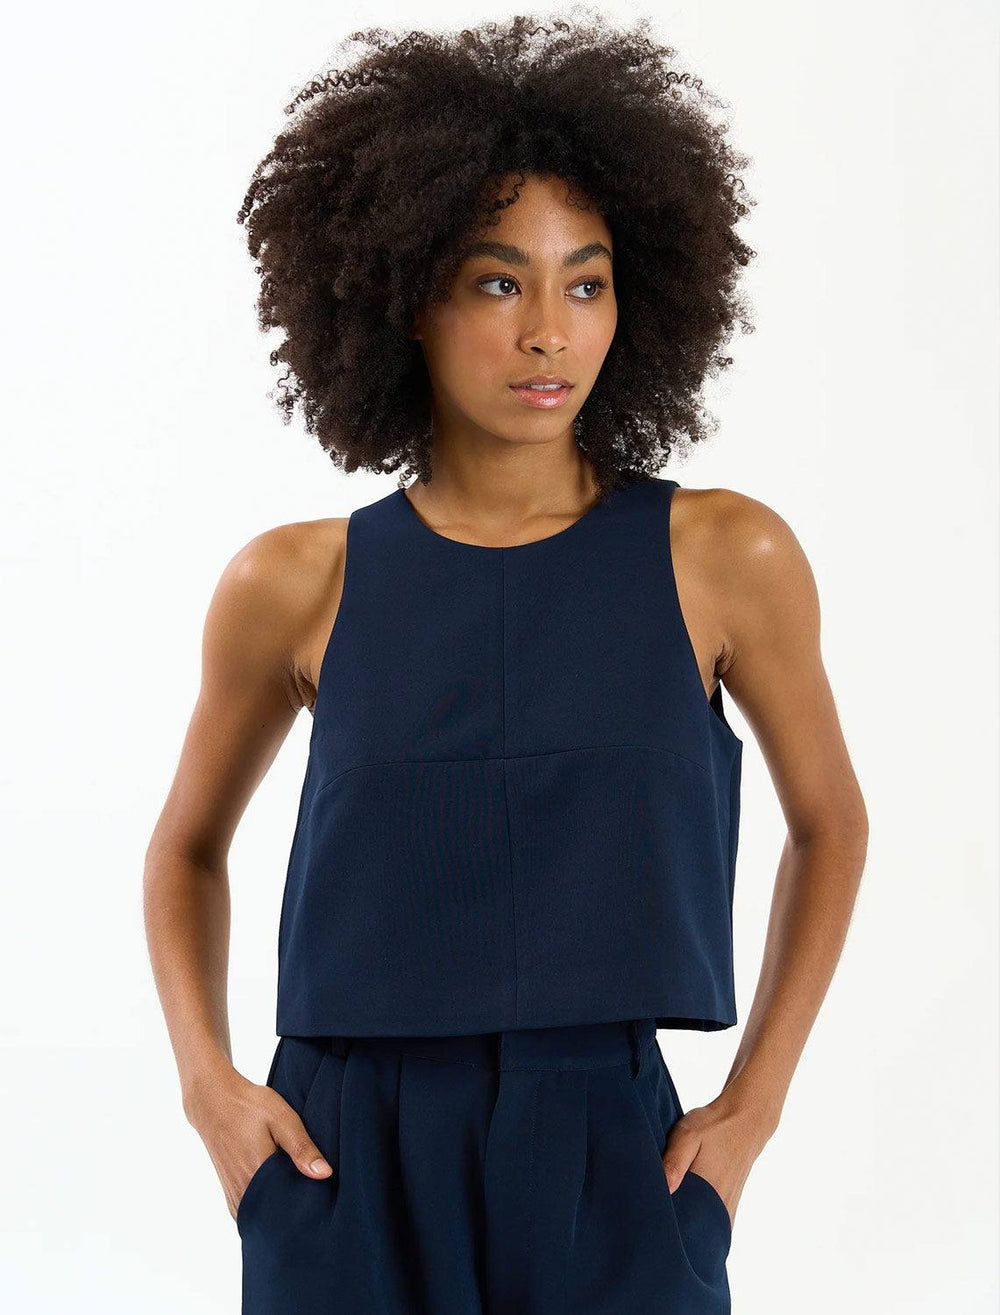 Model wearing Sundays NYC's rae top in navy.